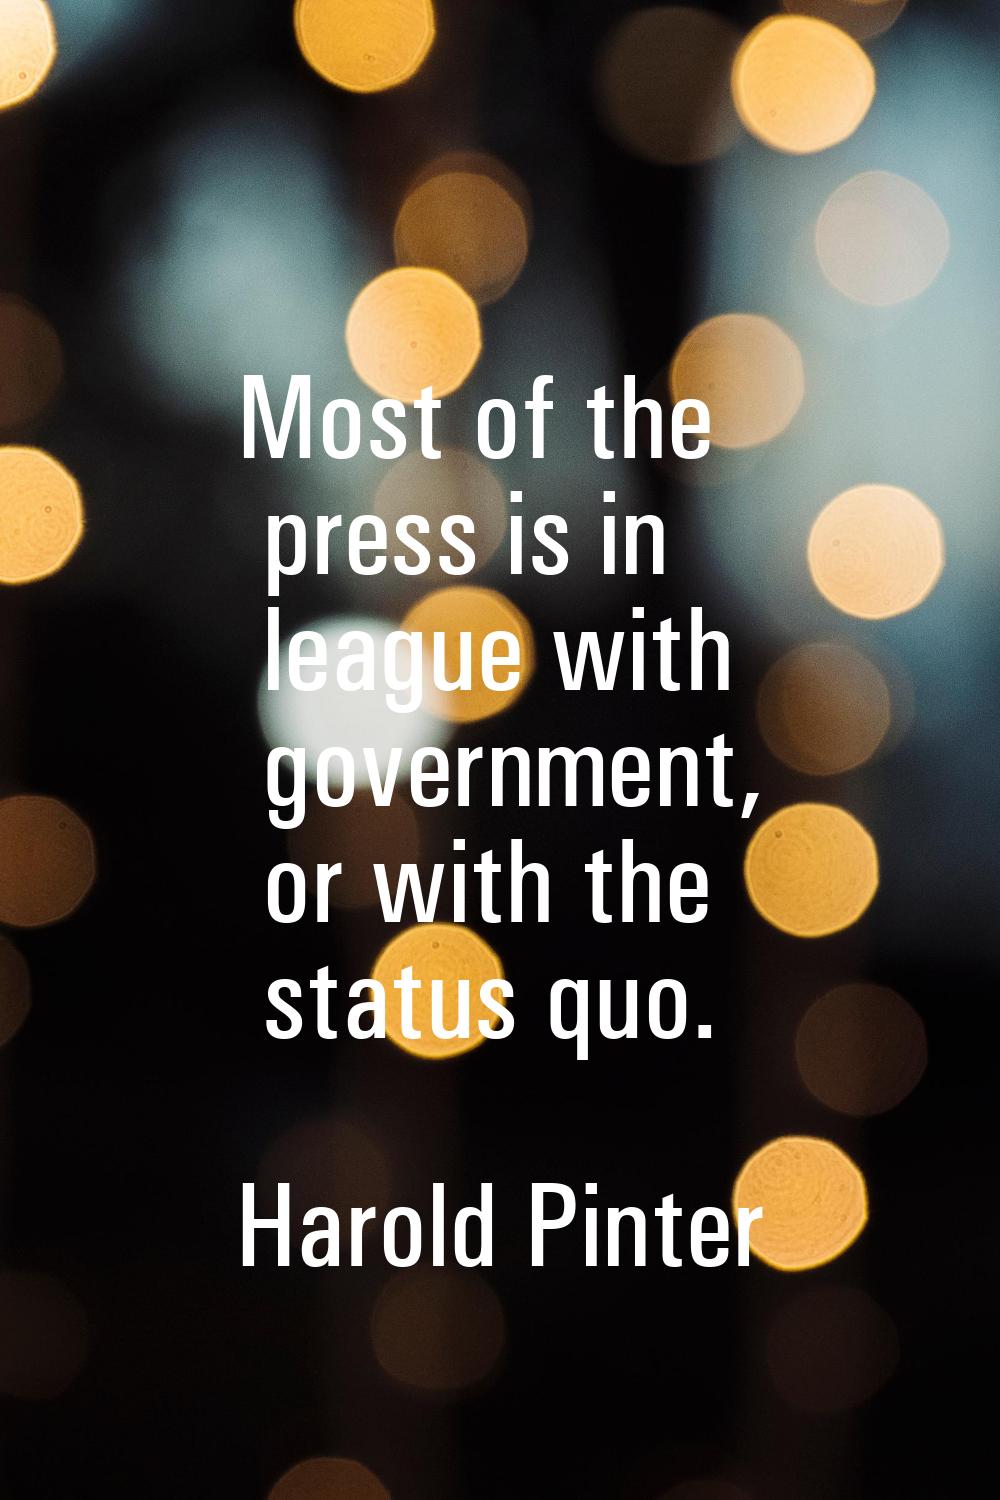 Most of the press is in league with government, or with the status quo.